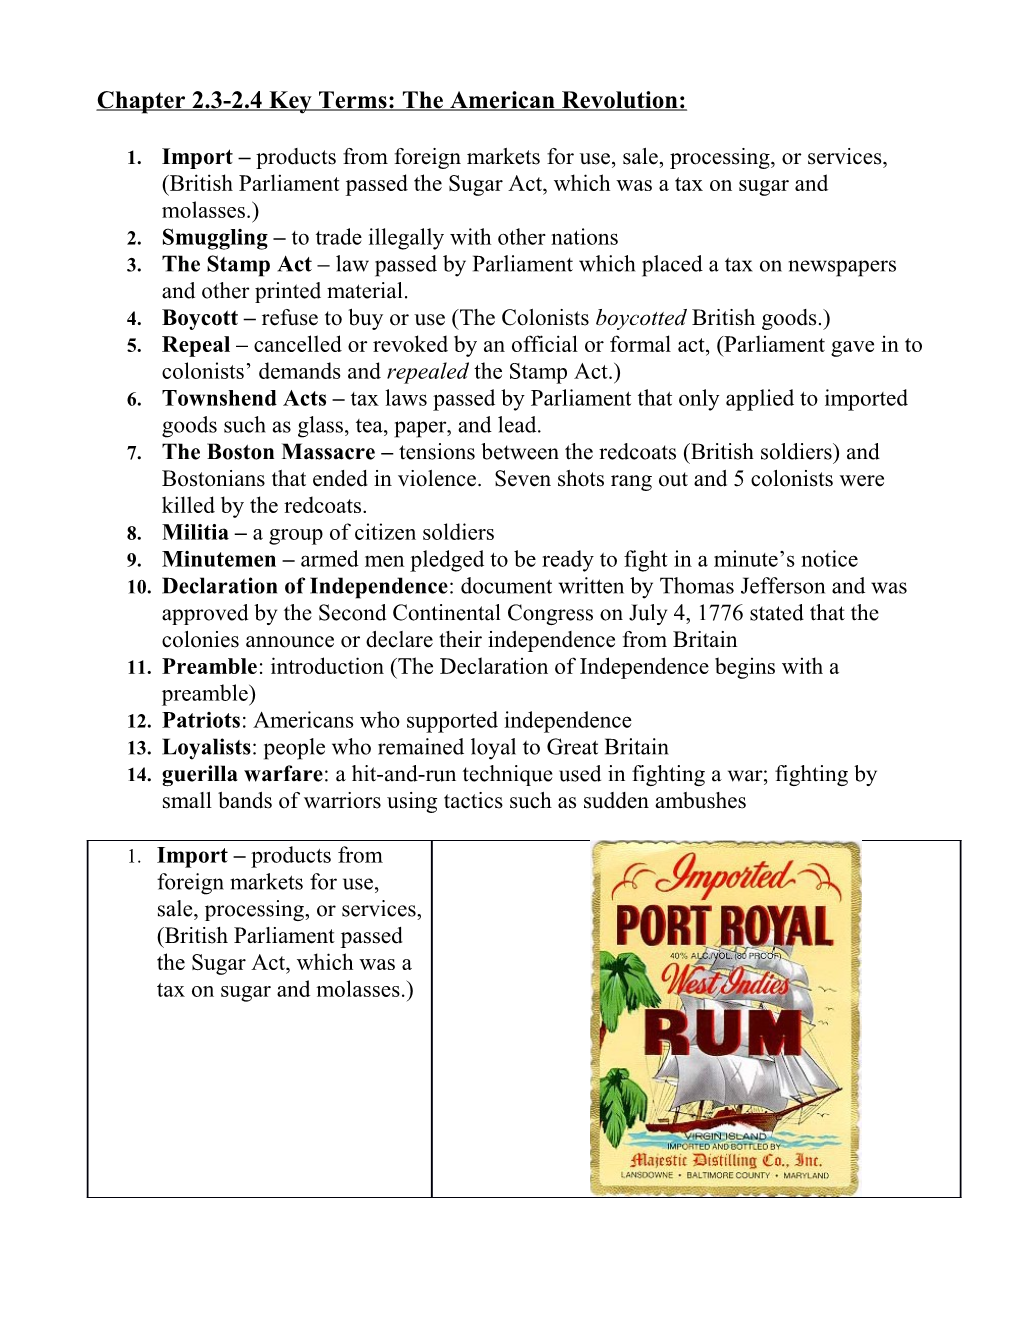 Chapter 12 Key Terms Road to Civil War